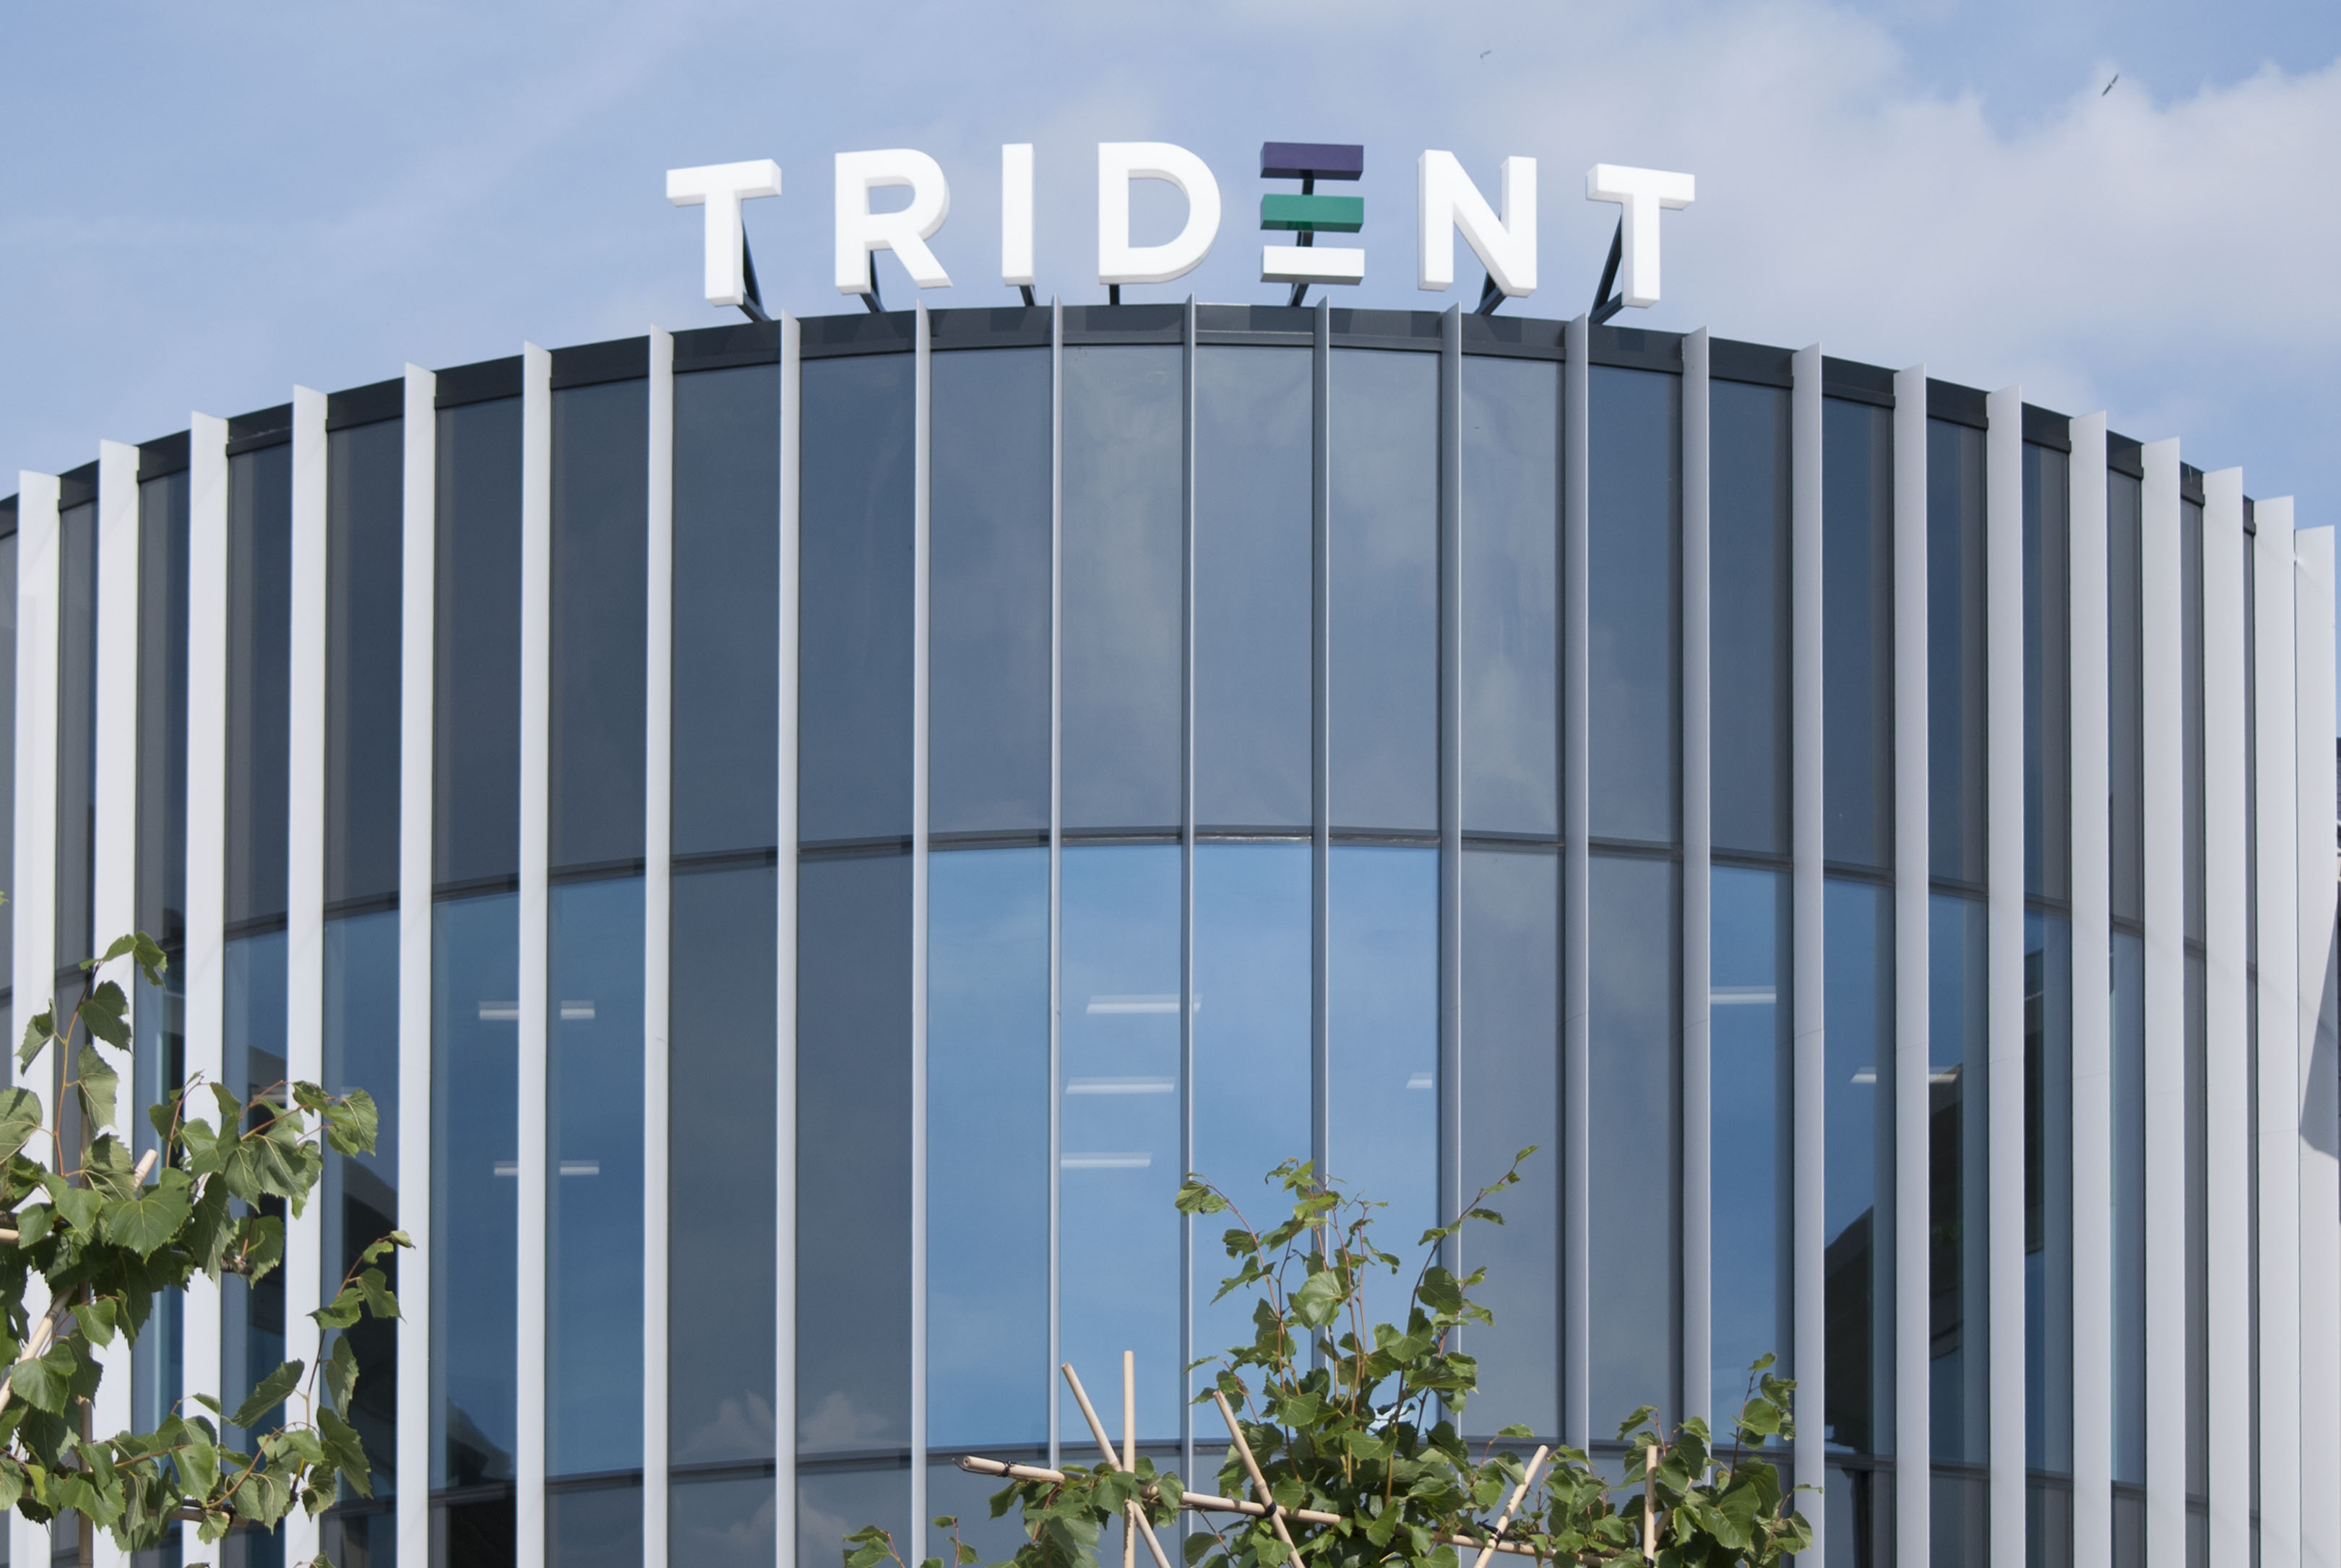 Trident roof sign